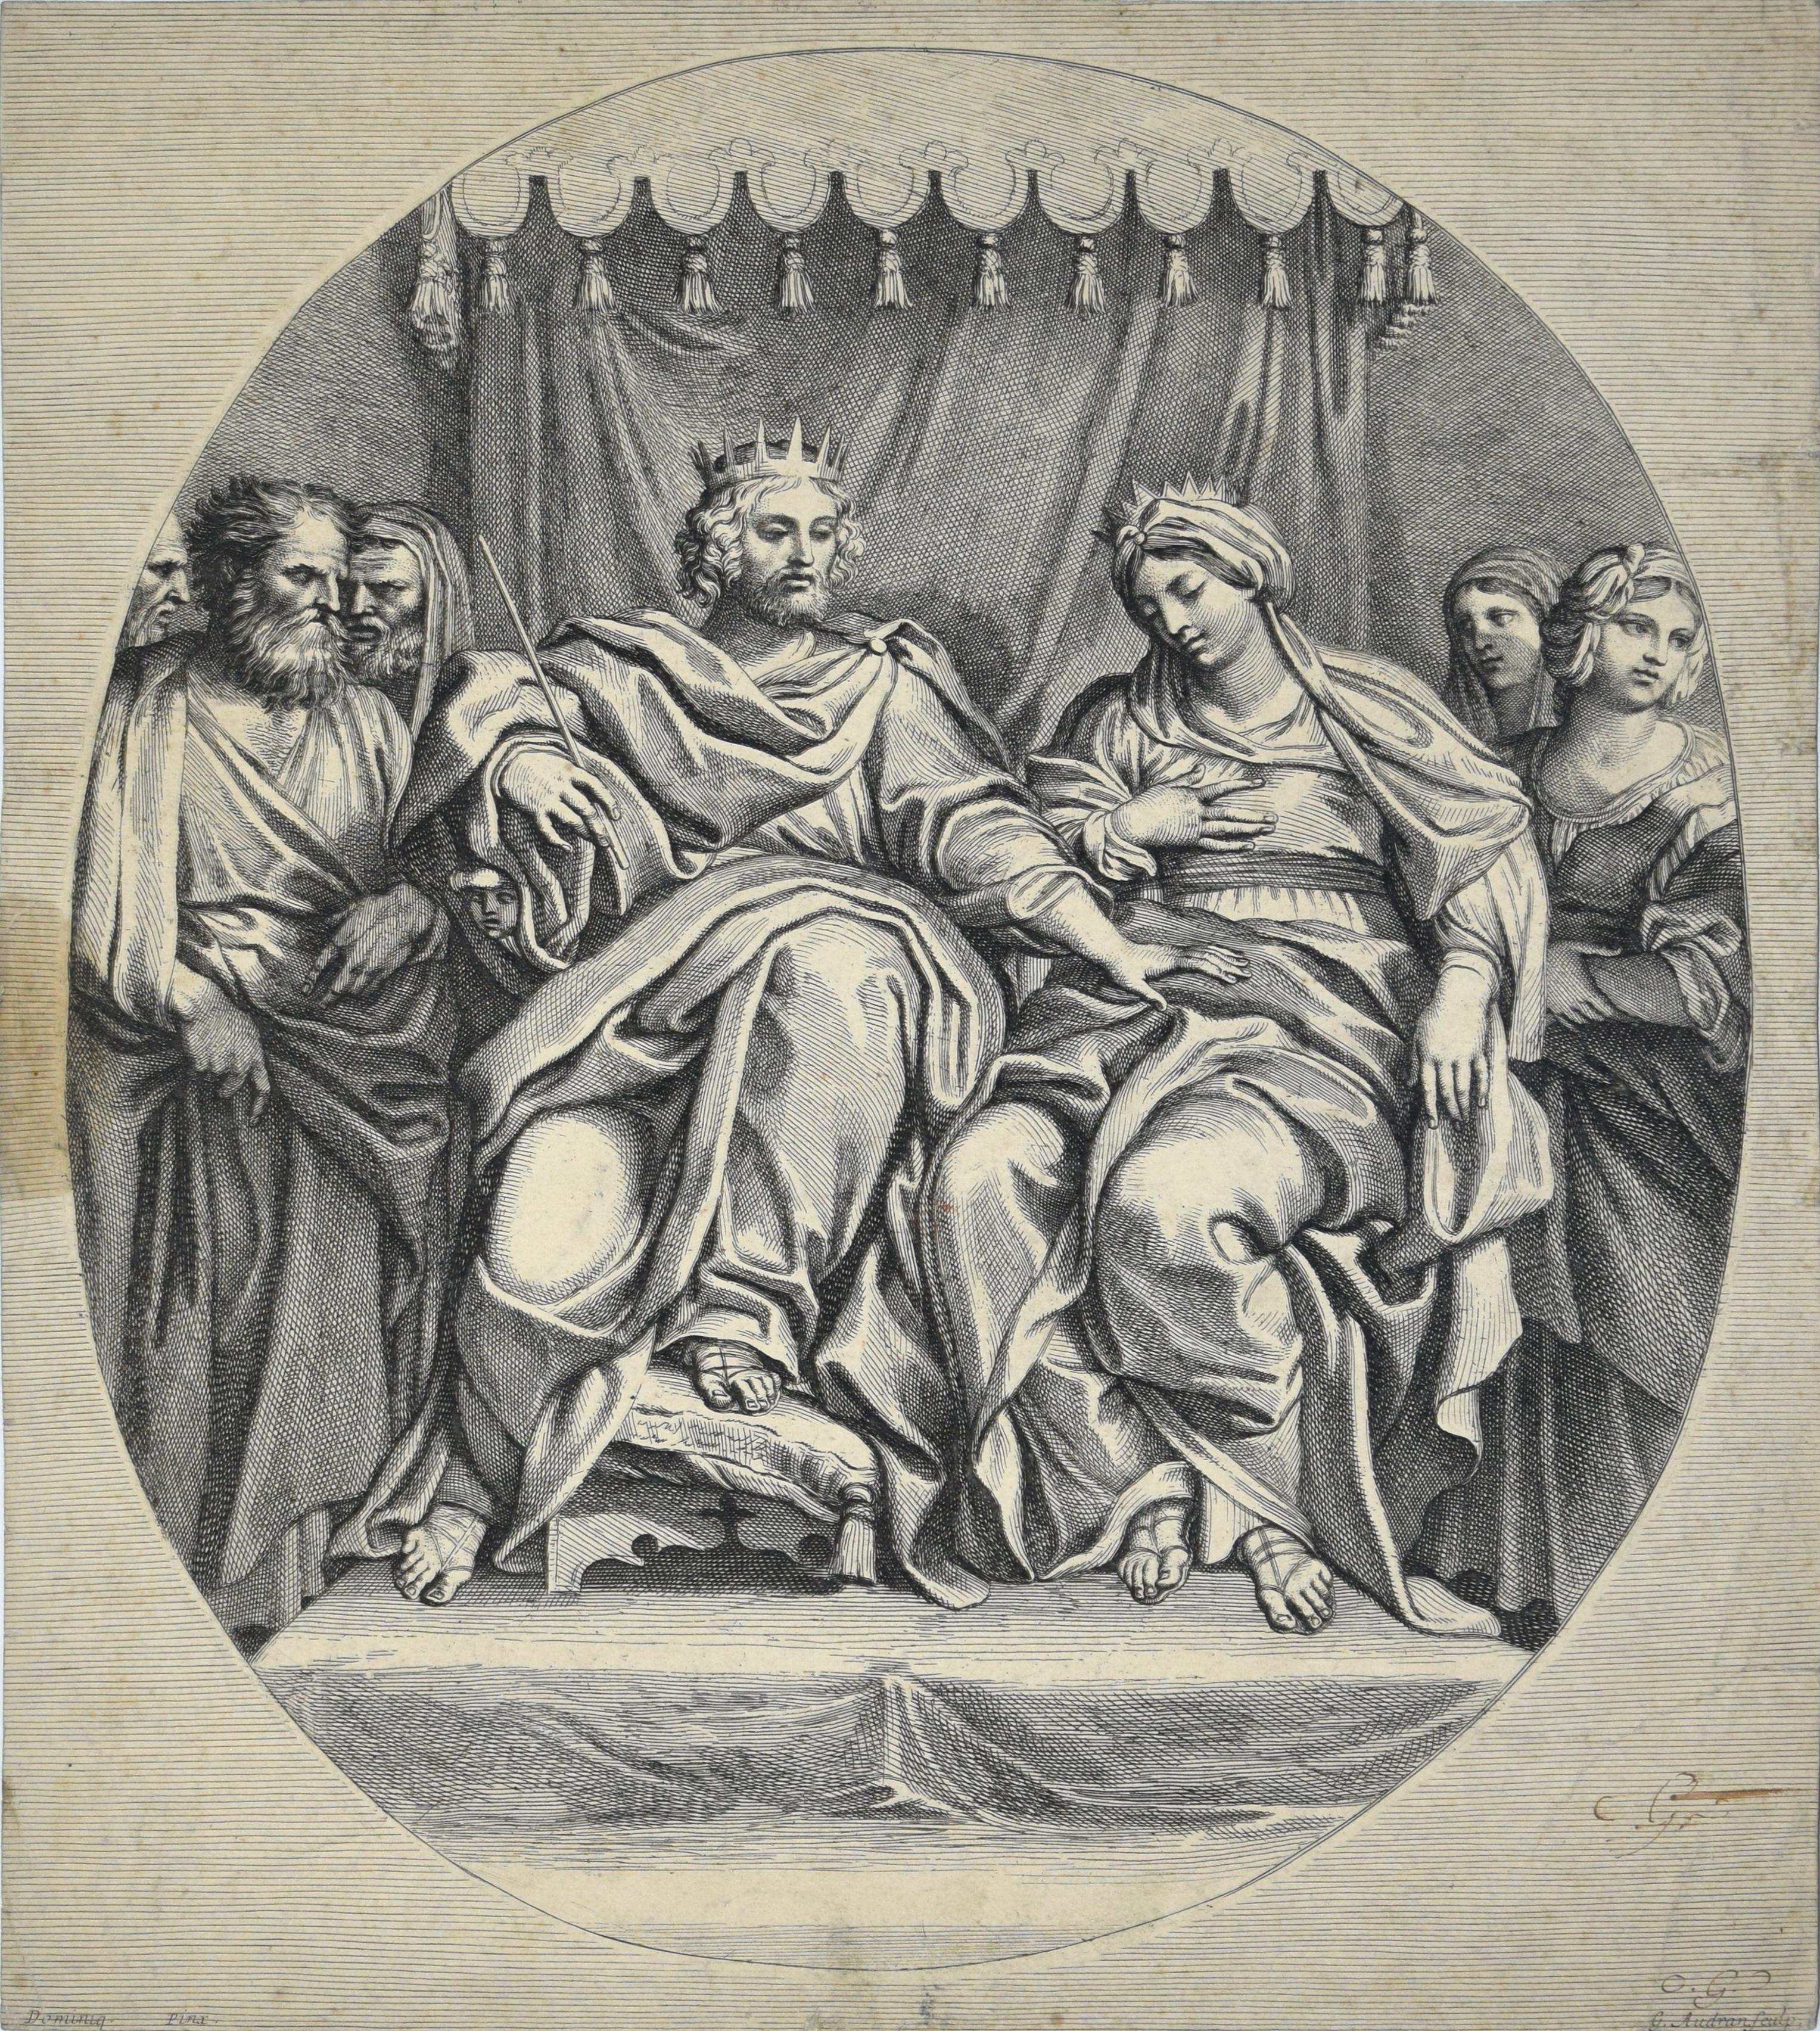 The King and the Queen - Etching after Domeniquin (Domenichino) by G. Audran